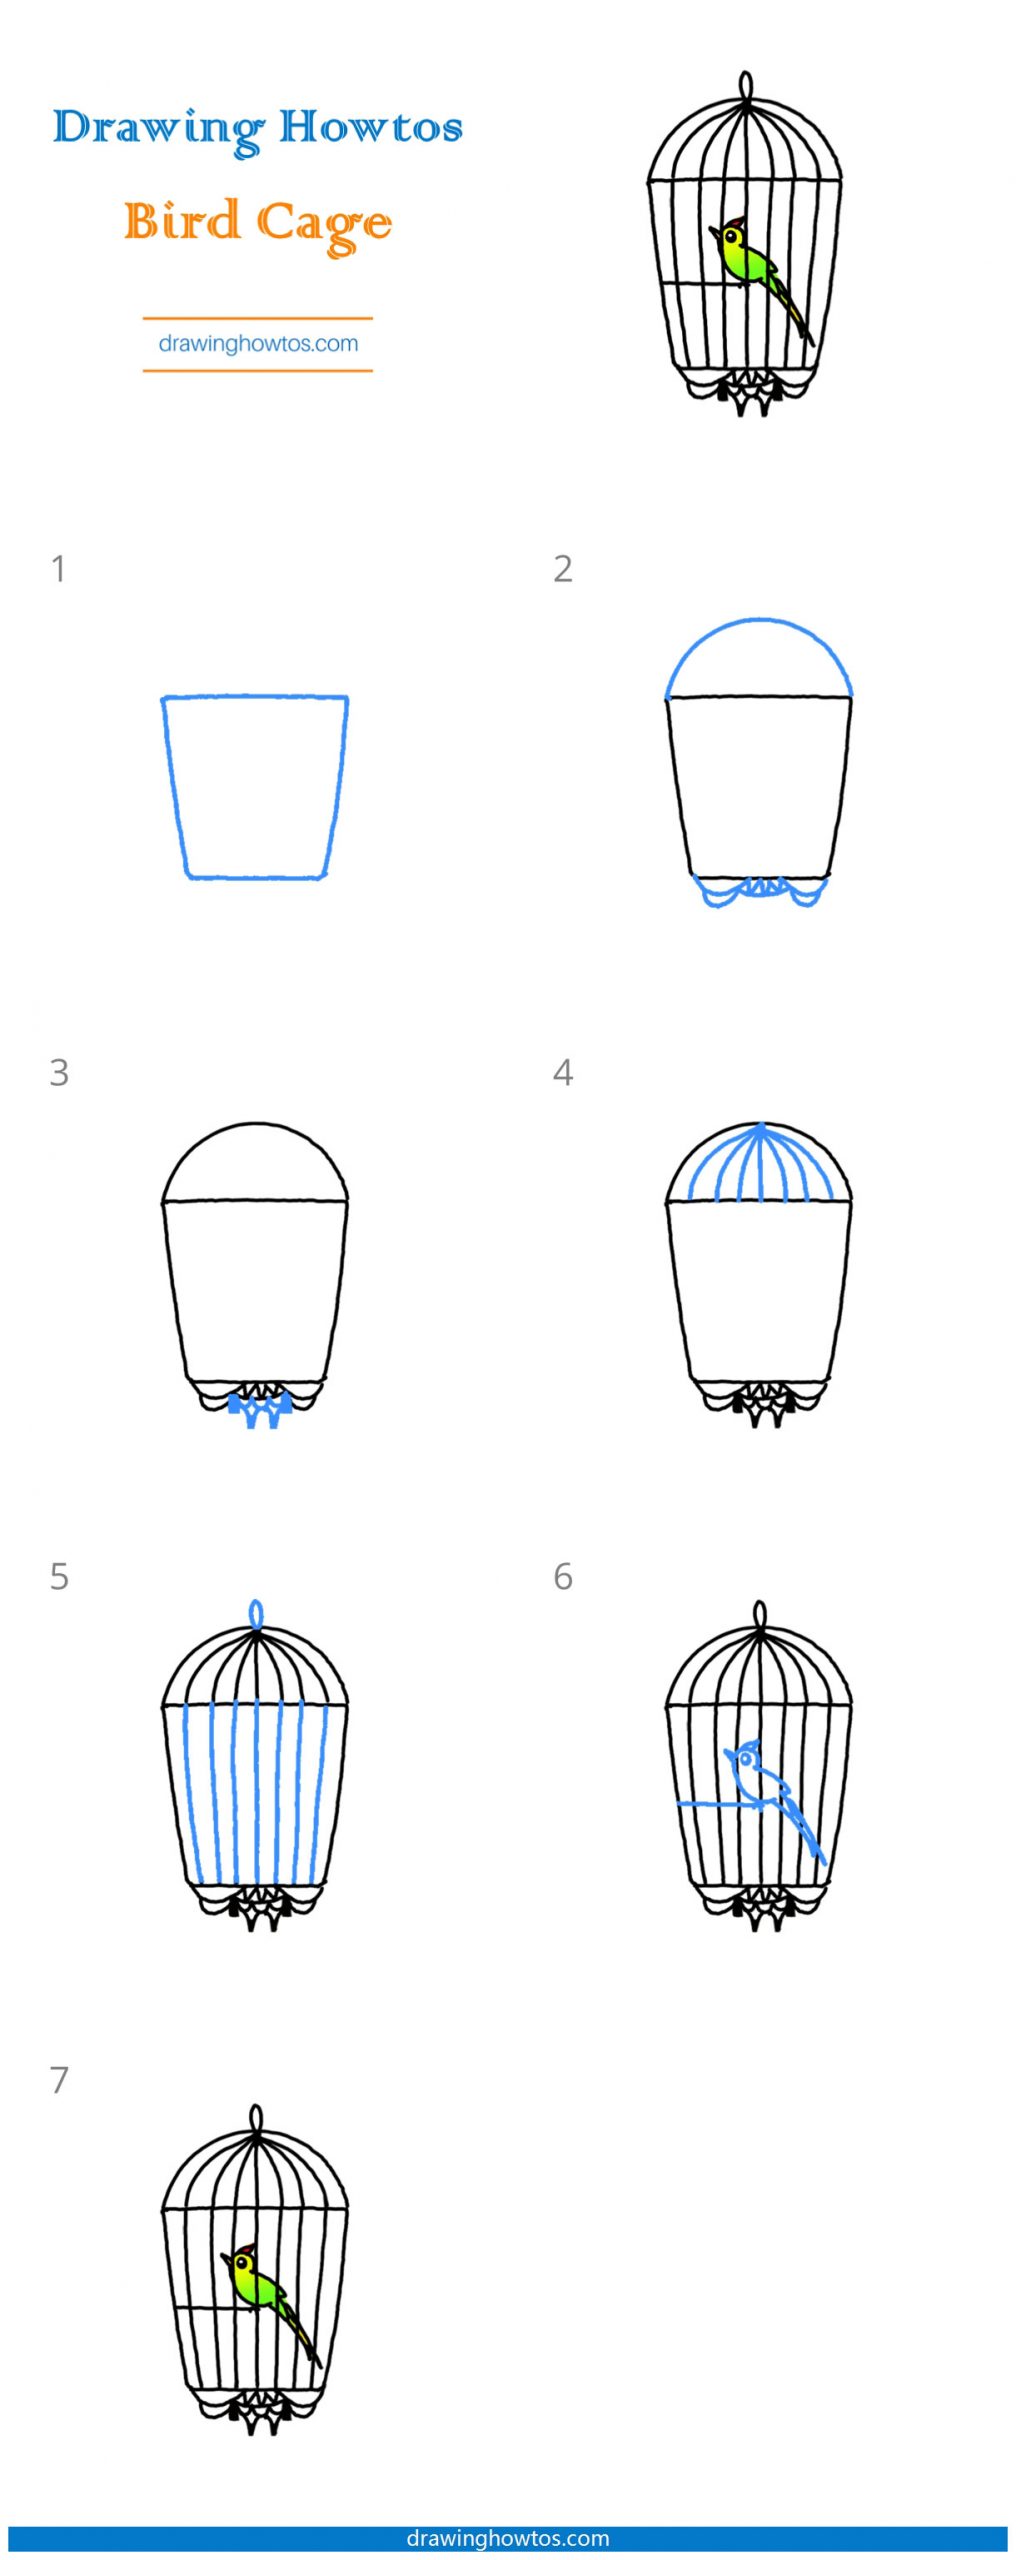 How to Draw a Bird Cage Step by Step Easy Drawing Guides Drawing Howtos